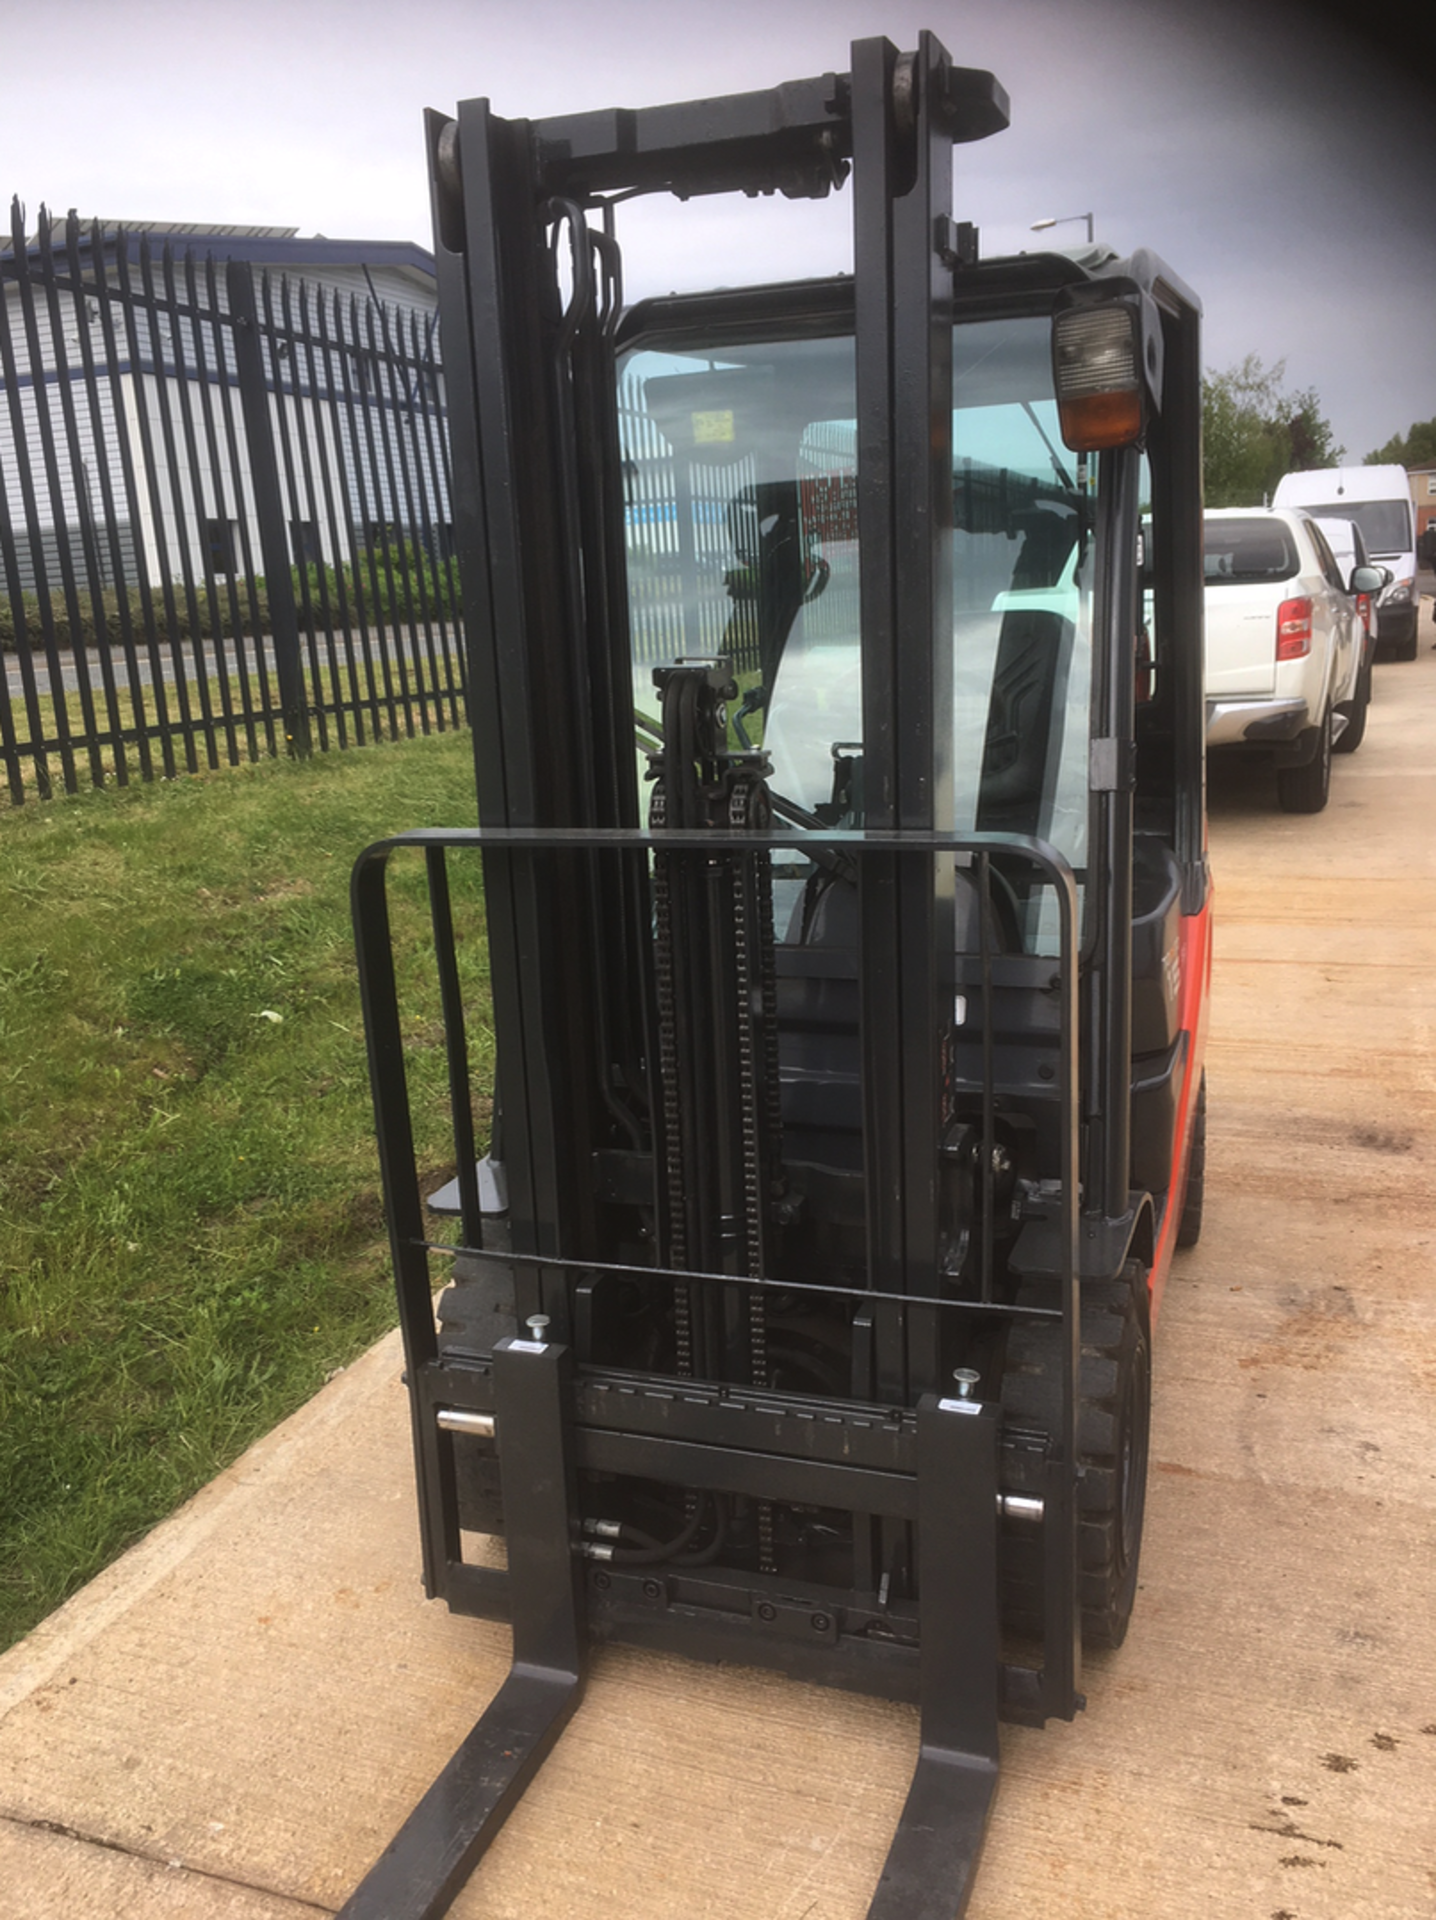 Toyota SAS Series 8 Gas Fork Lift Truck - Fully Refurbished. - Image 8 of 8